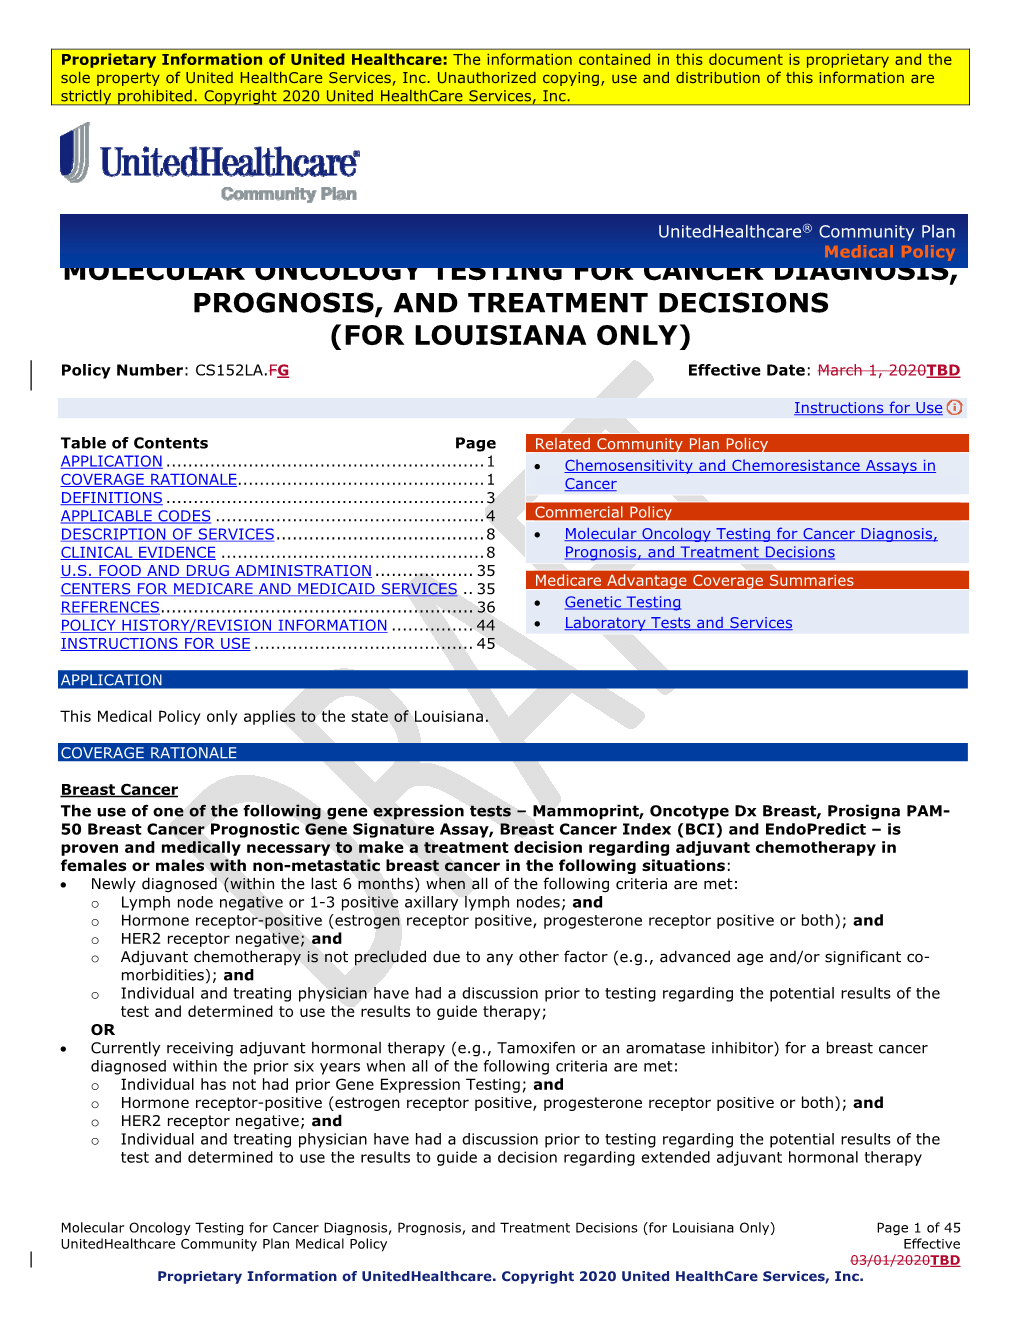 MOLECULAR ONCOLOGY TESTING for CANCER DIAGNOSIS, PROGNOSIS, and TREATMENT DECISIONS (FOR LOUISIANA ONLY) Policy Number: CS152LA.FG Effective Date: March 1, 2020TBD